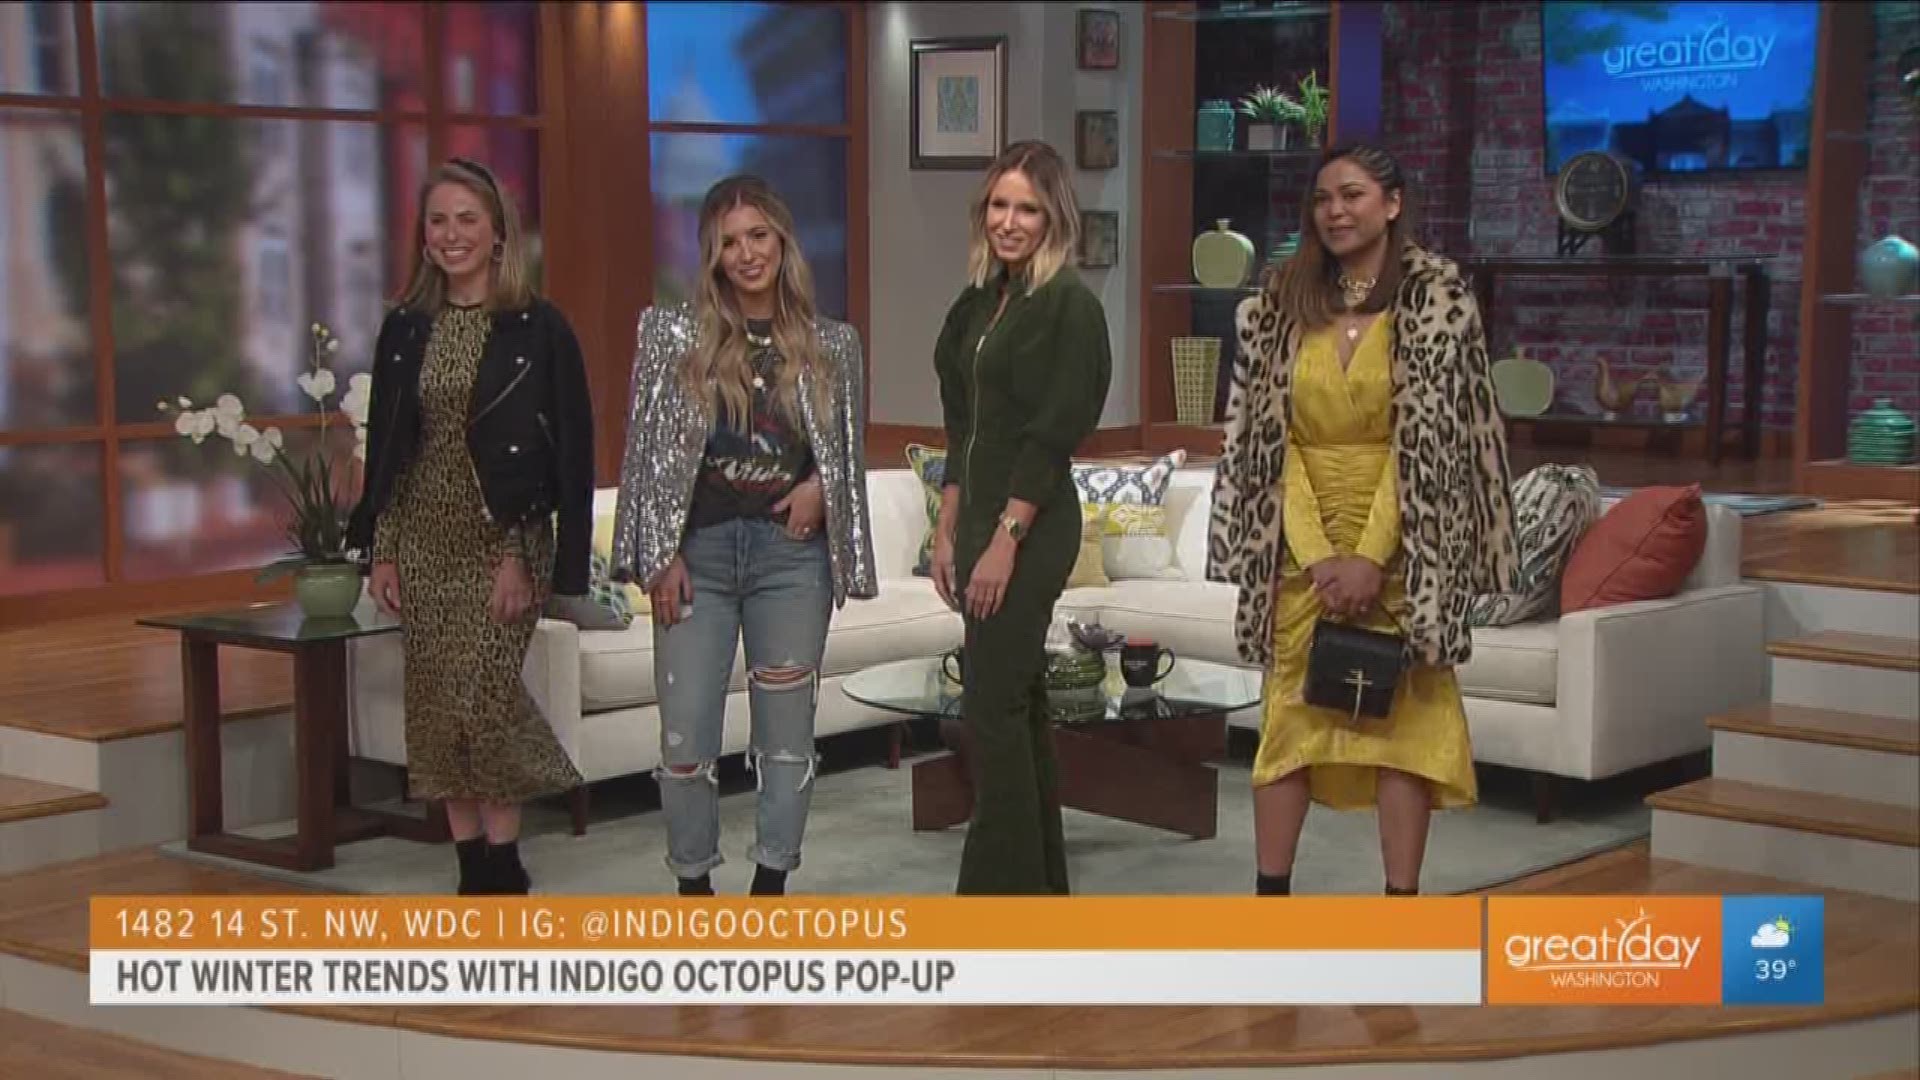 Lifestyle influencer Natalie Pinto shares a few glamorous winter season outfits from Indigo Octopus, a holiday pop-up shop. For more details, visit indigooctopus.com